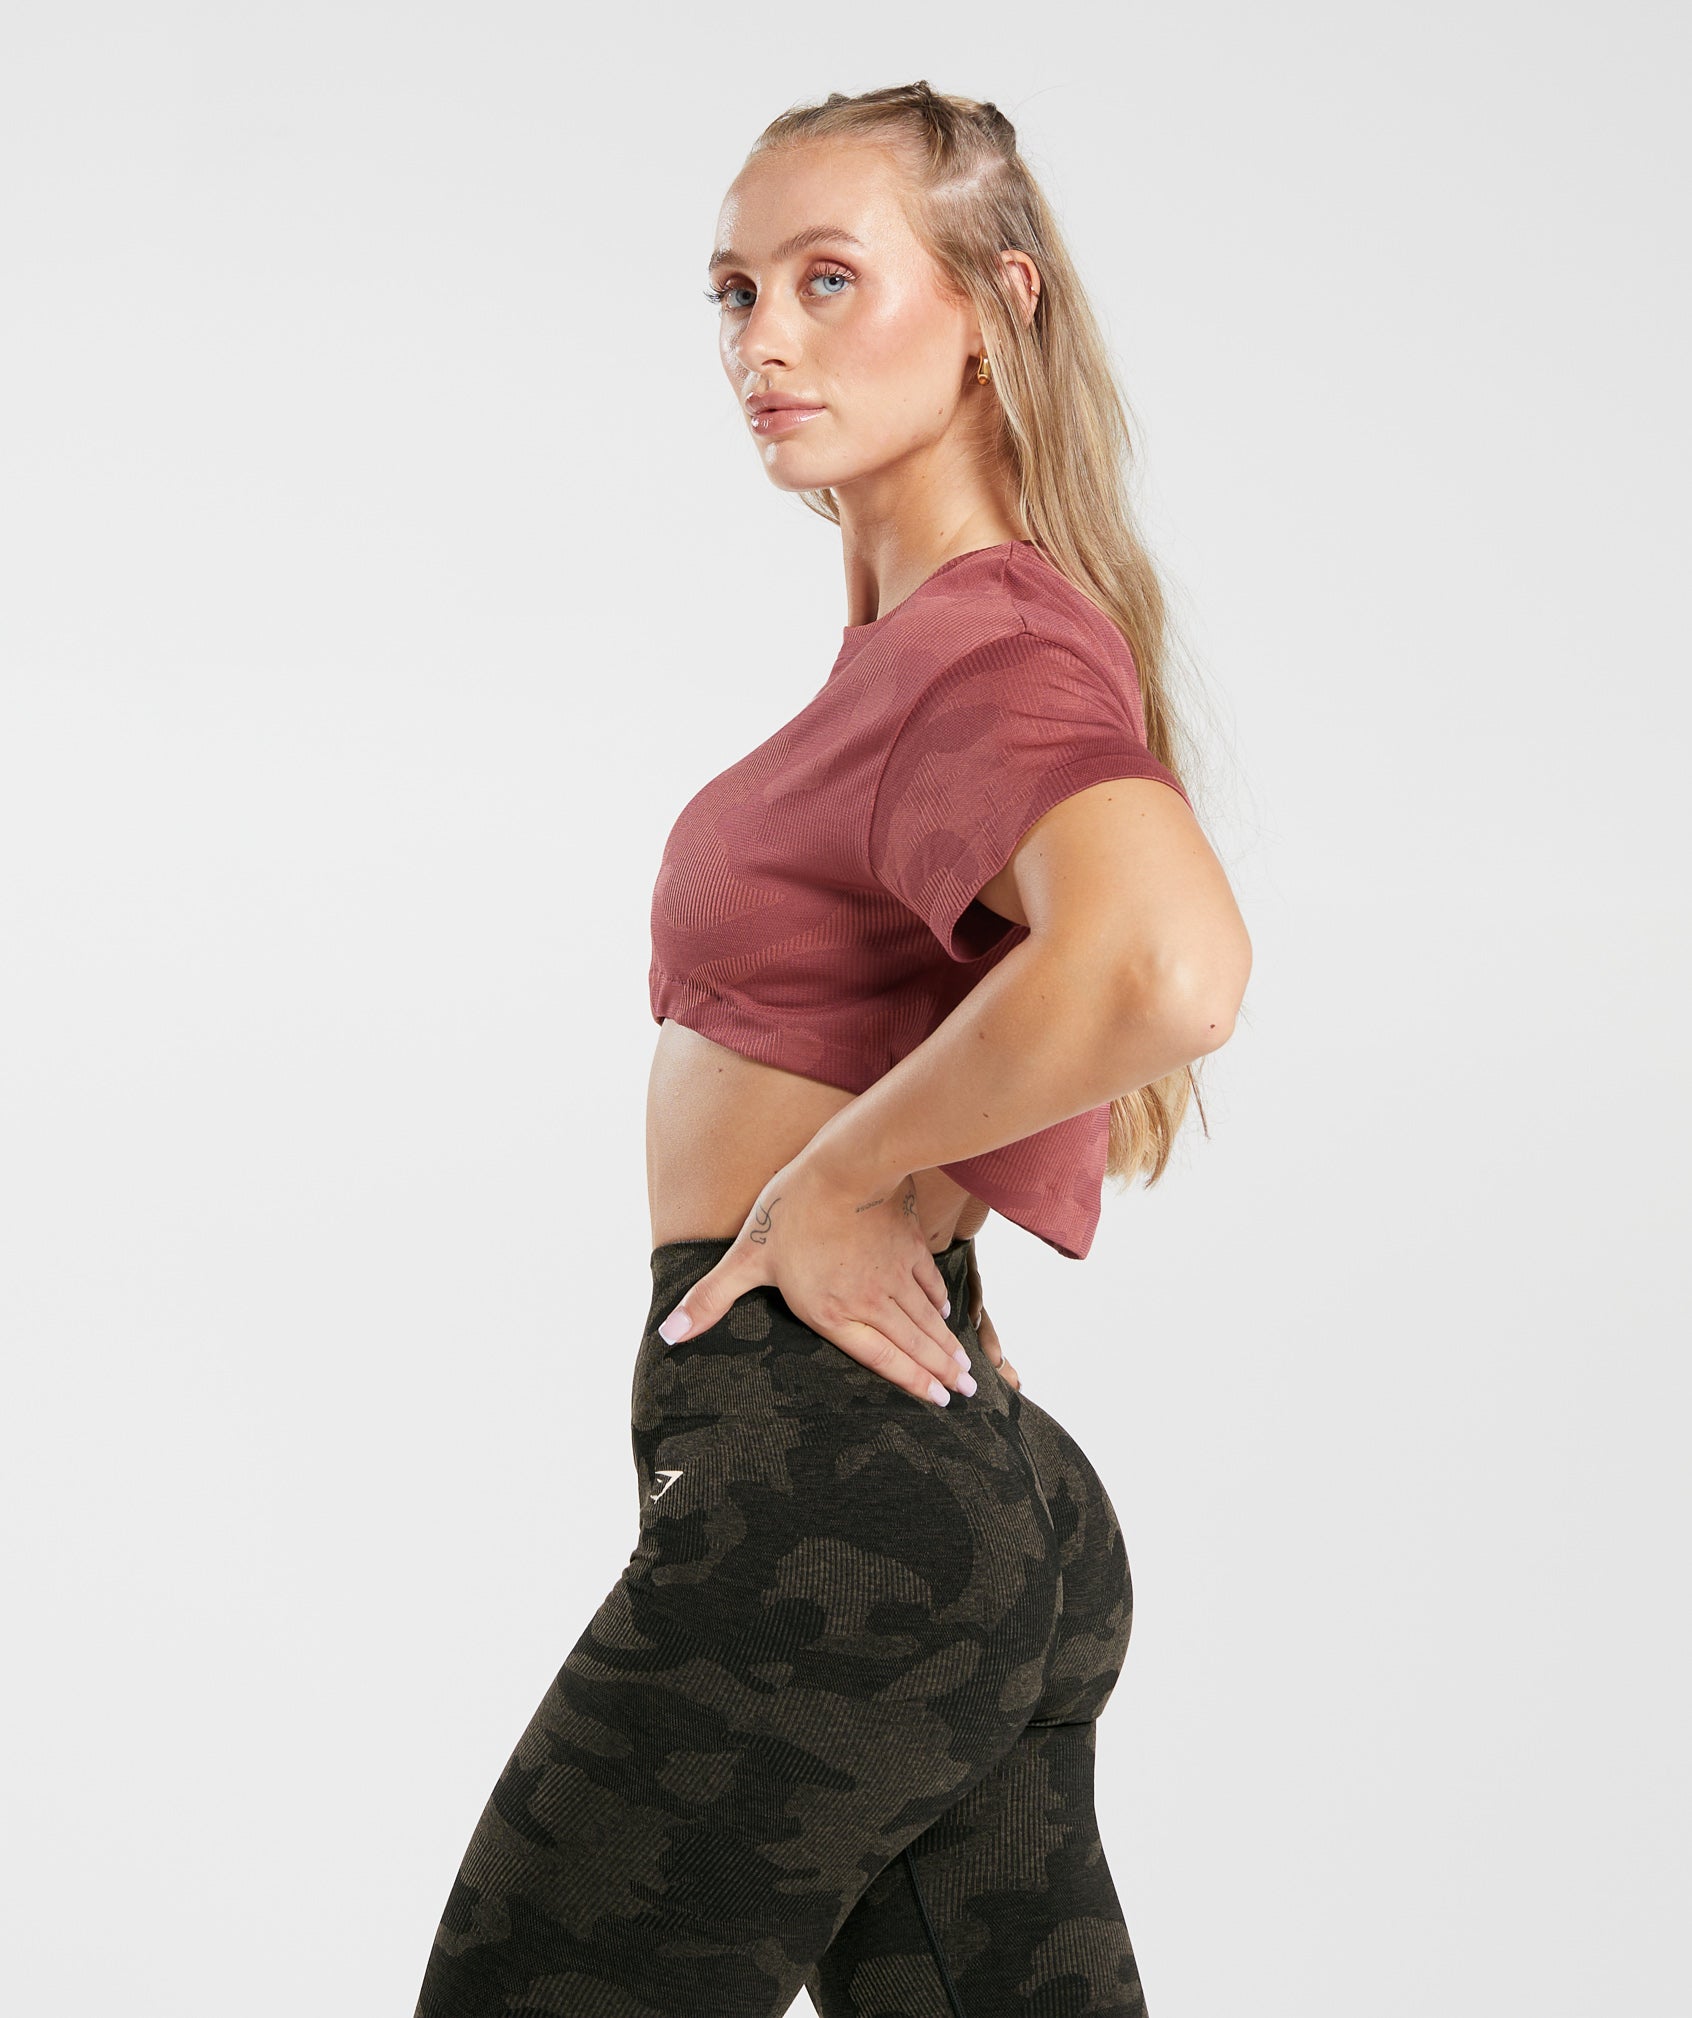 Gymshark Adapt Camo Seamless Ribbed Crop Top - Soft Berry/Sunbaked Pink